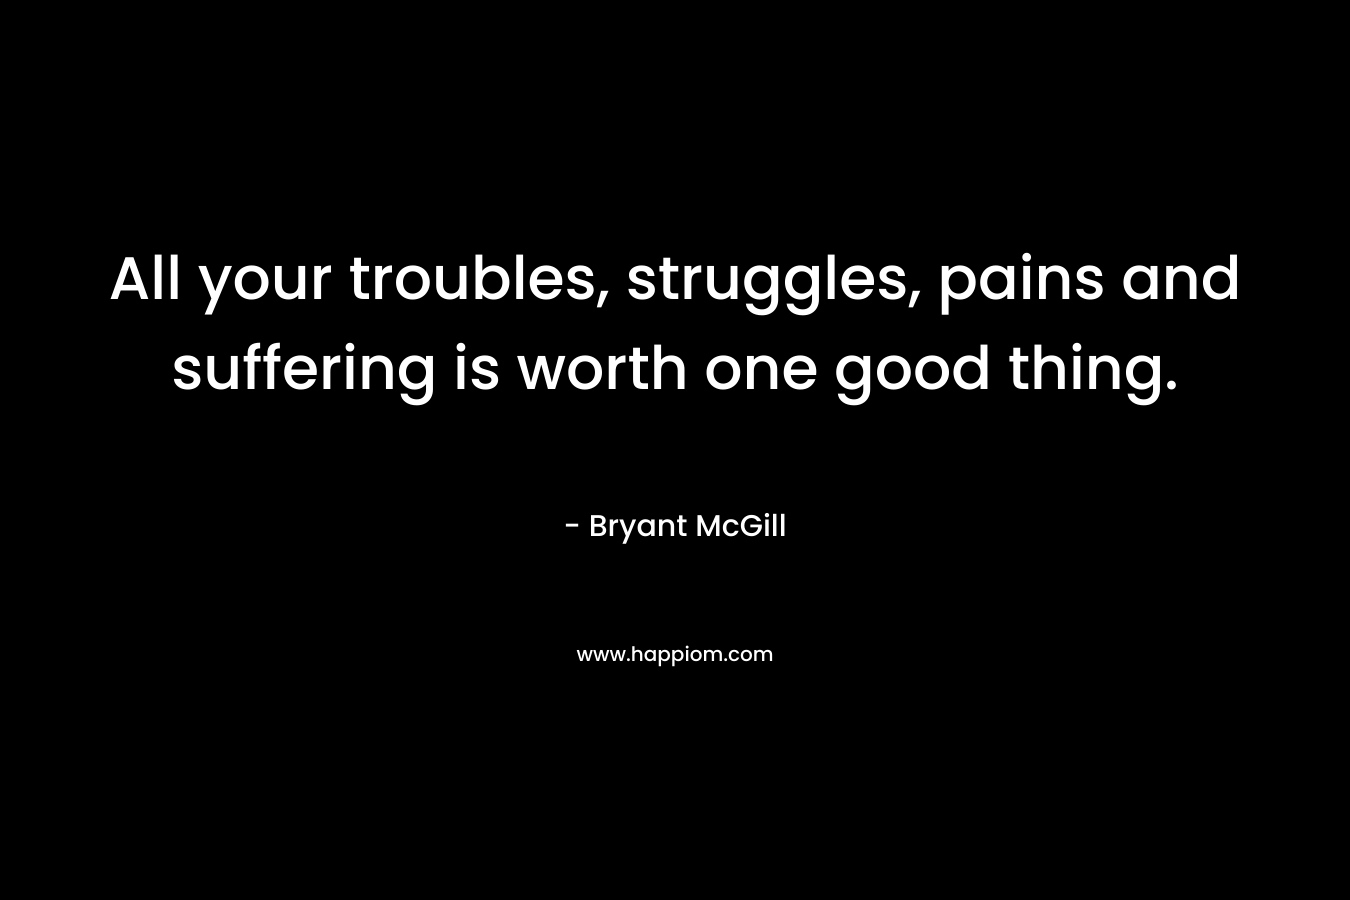 All your troubles, struggles, pains and suffering is worth one good thing.